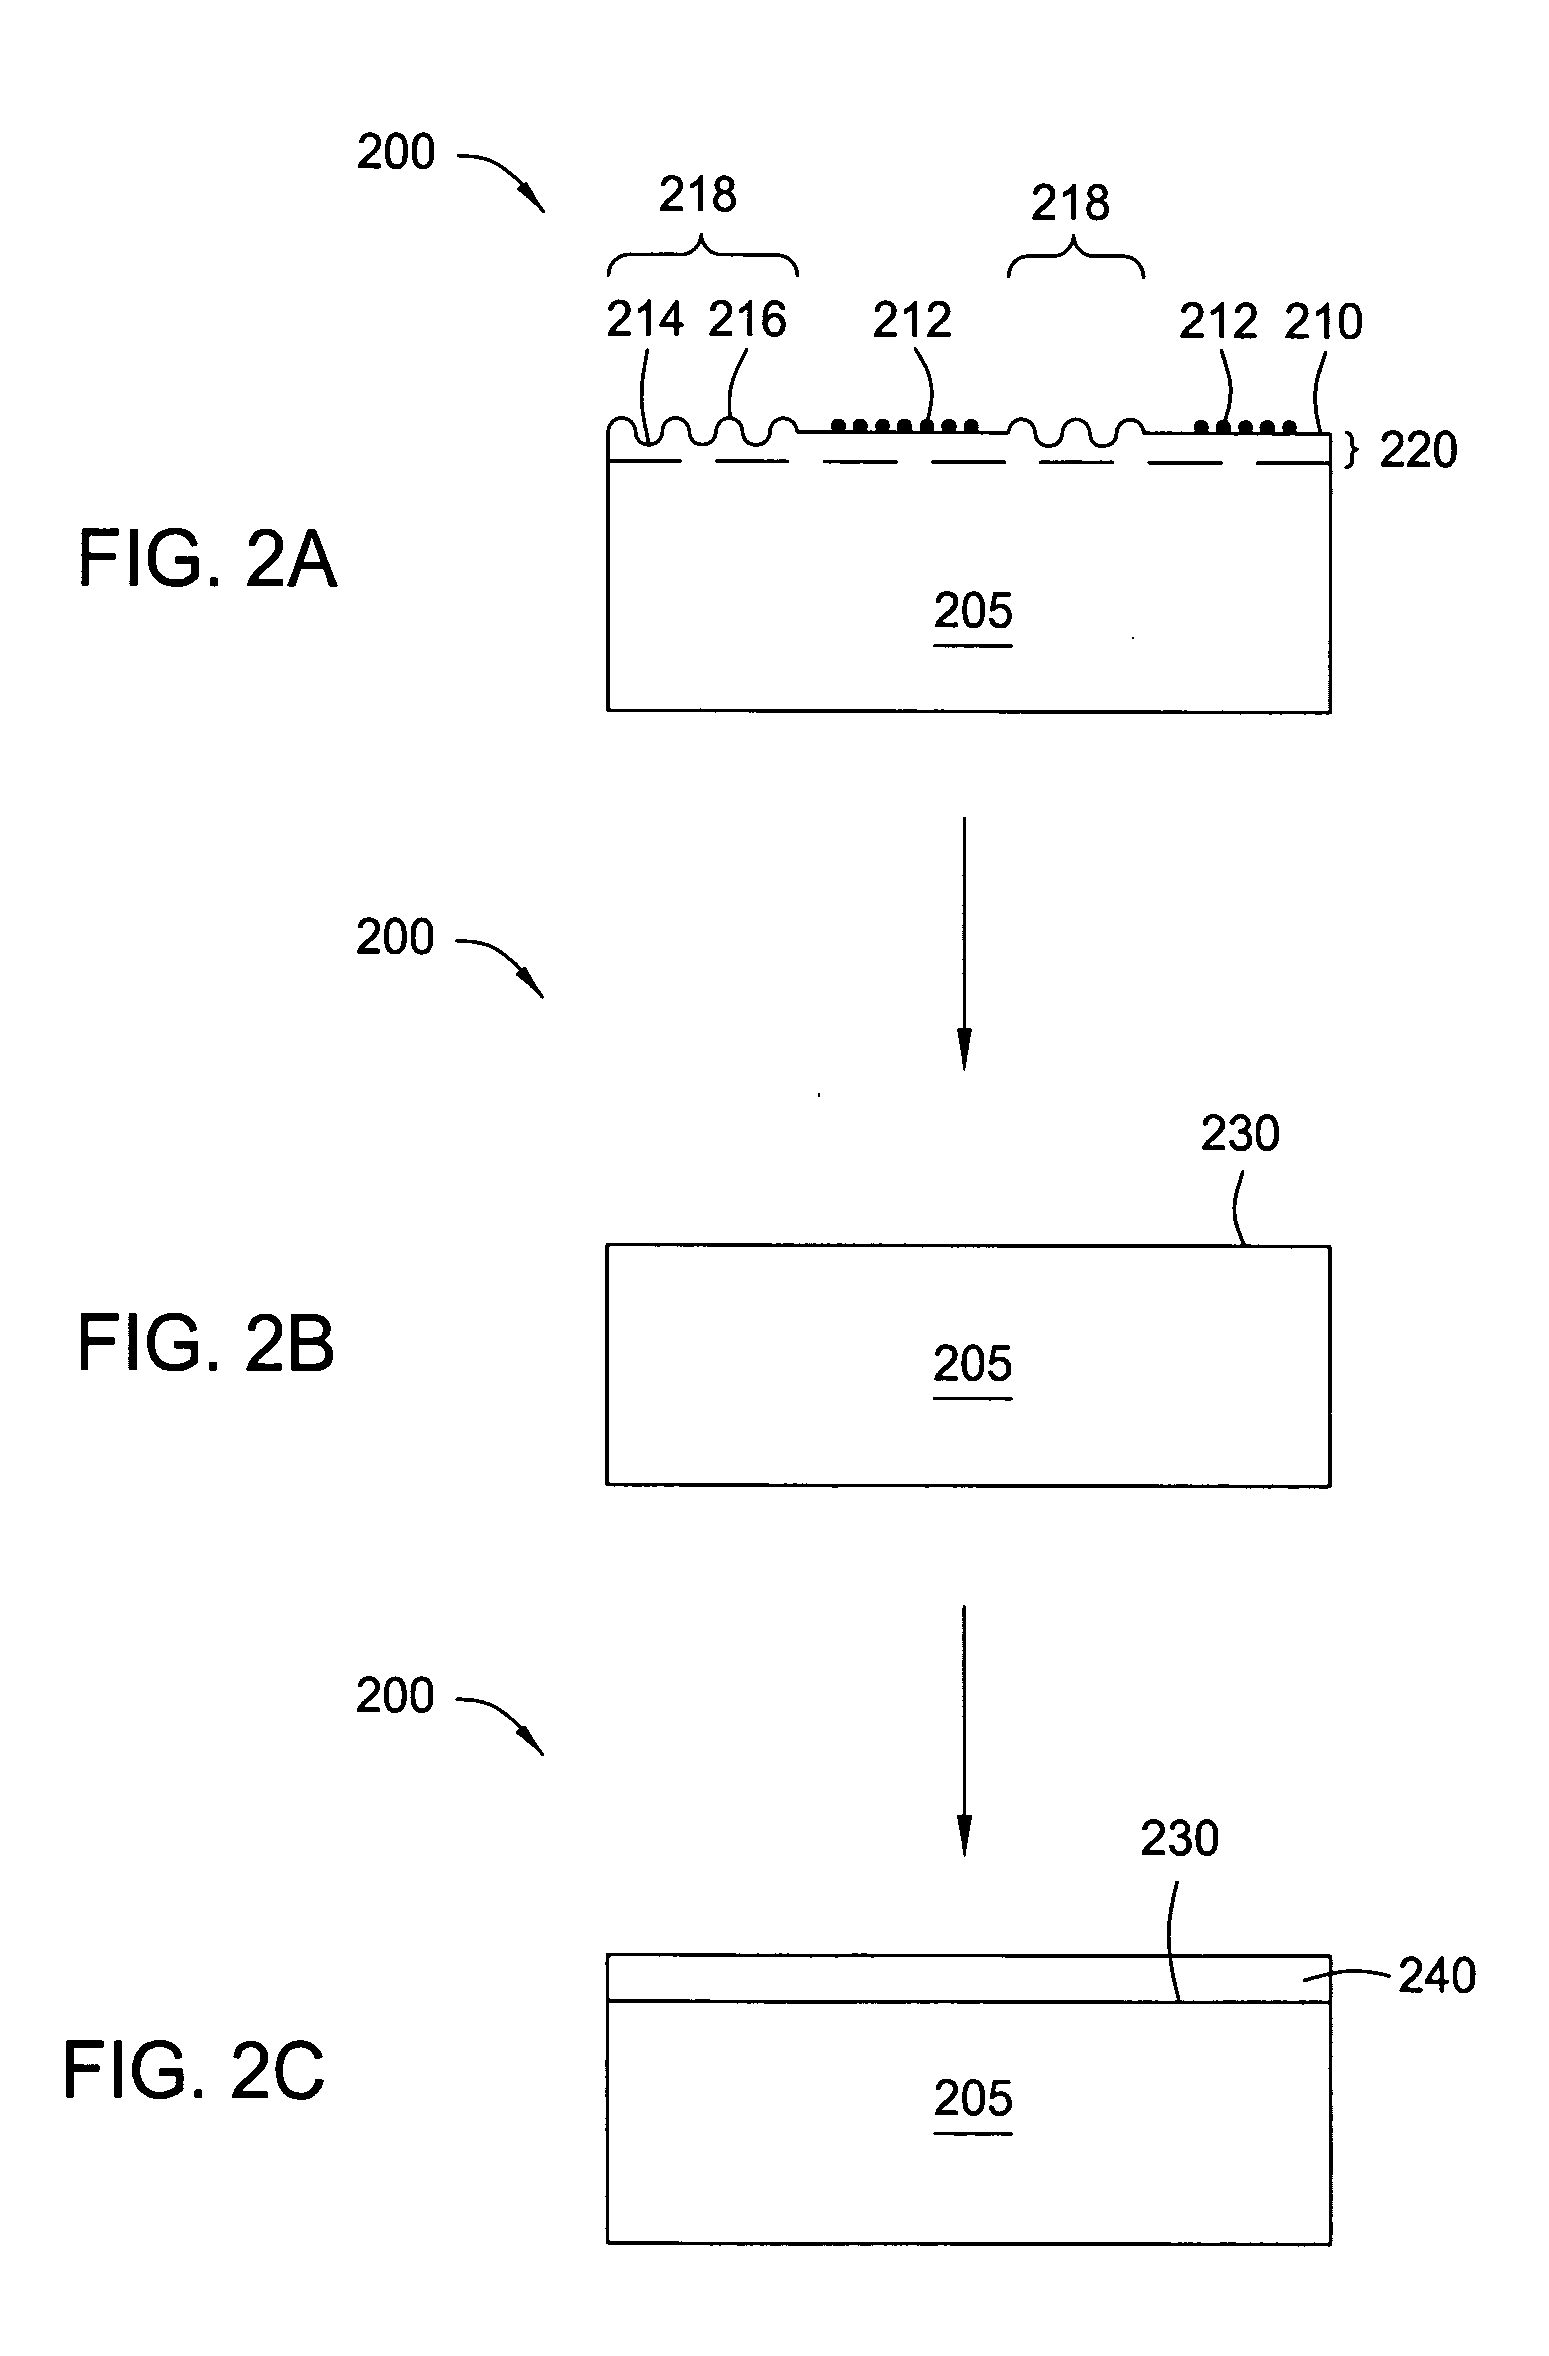 Etchant treatment processes for substrate surfaces and chamber surfaces